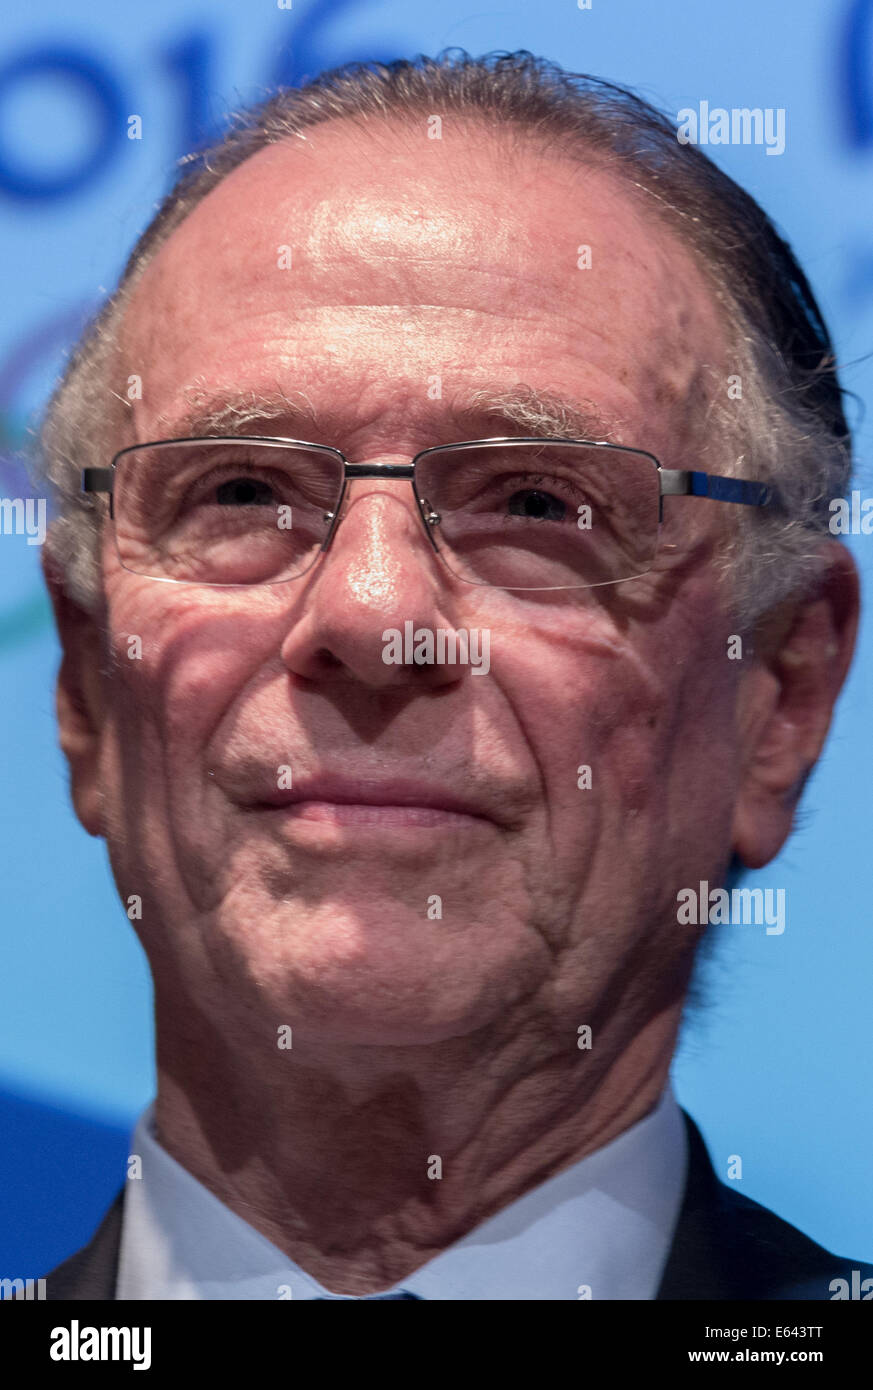 Rio de Janeiro, Brazil. 4th Aug, 2014. The head of the organising committee for the 2016 Olympic Games, Carlos Nuzman, attends a conference in Rio de Janeiro, Brazil, 4 August 2014. The 2016 summer olympics are going to be carried out in Rio de Janeiro. Photo: Michael Kappeler/dpa/Alamy Live News Stock Photo